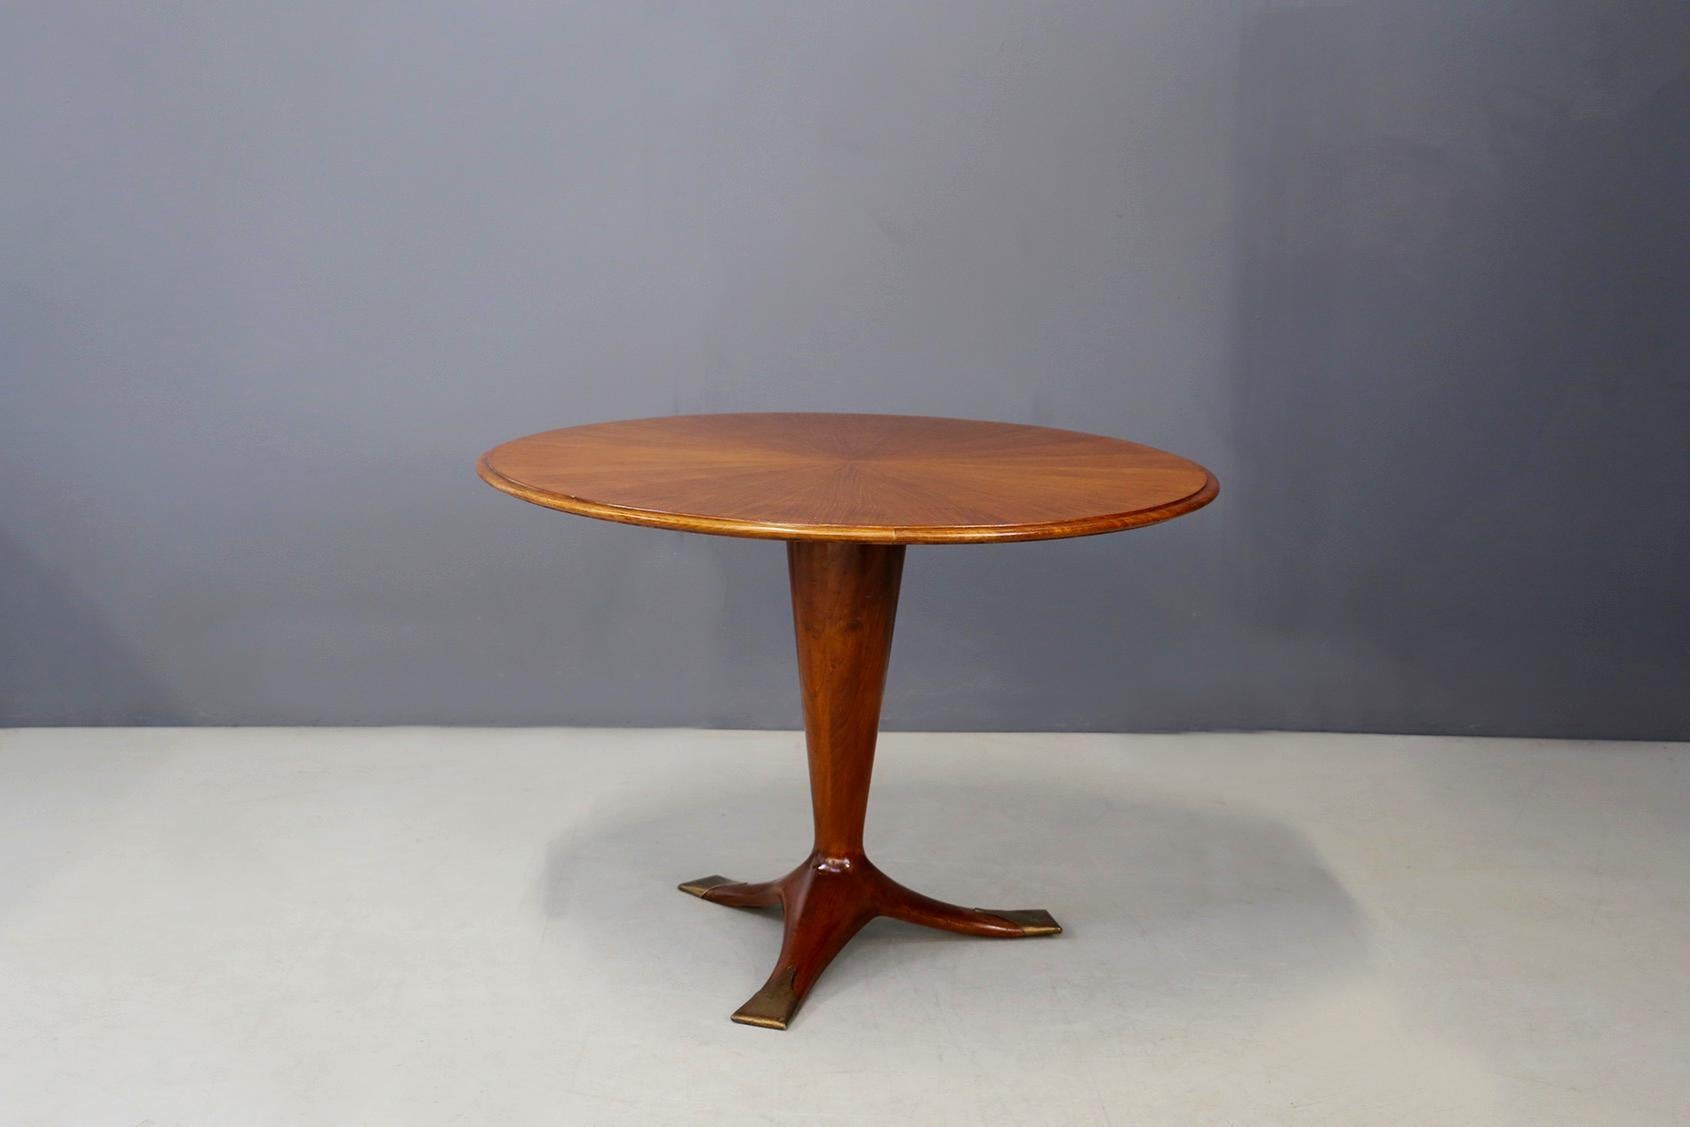 Rare flap table designed by Ico Pairsi in 1950. The table is published and includes certification. The table, thanks to the mechanism, folds down. Its support is a single pendant with 3 brass feet. The table is in very good condition with slight